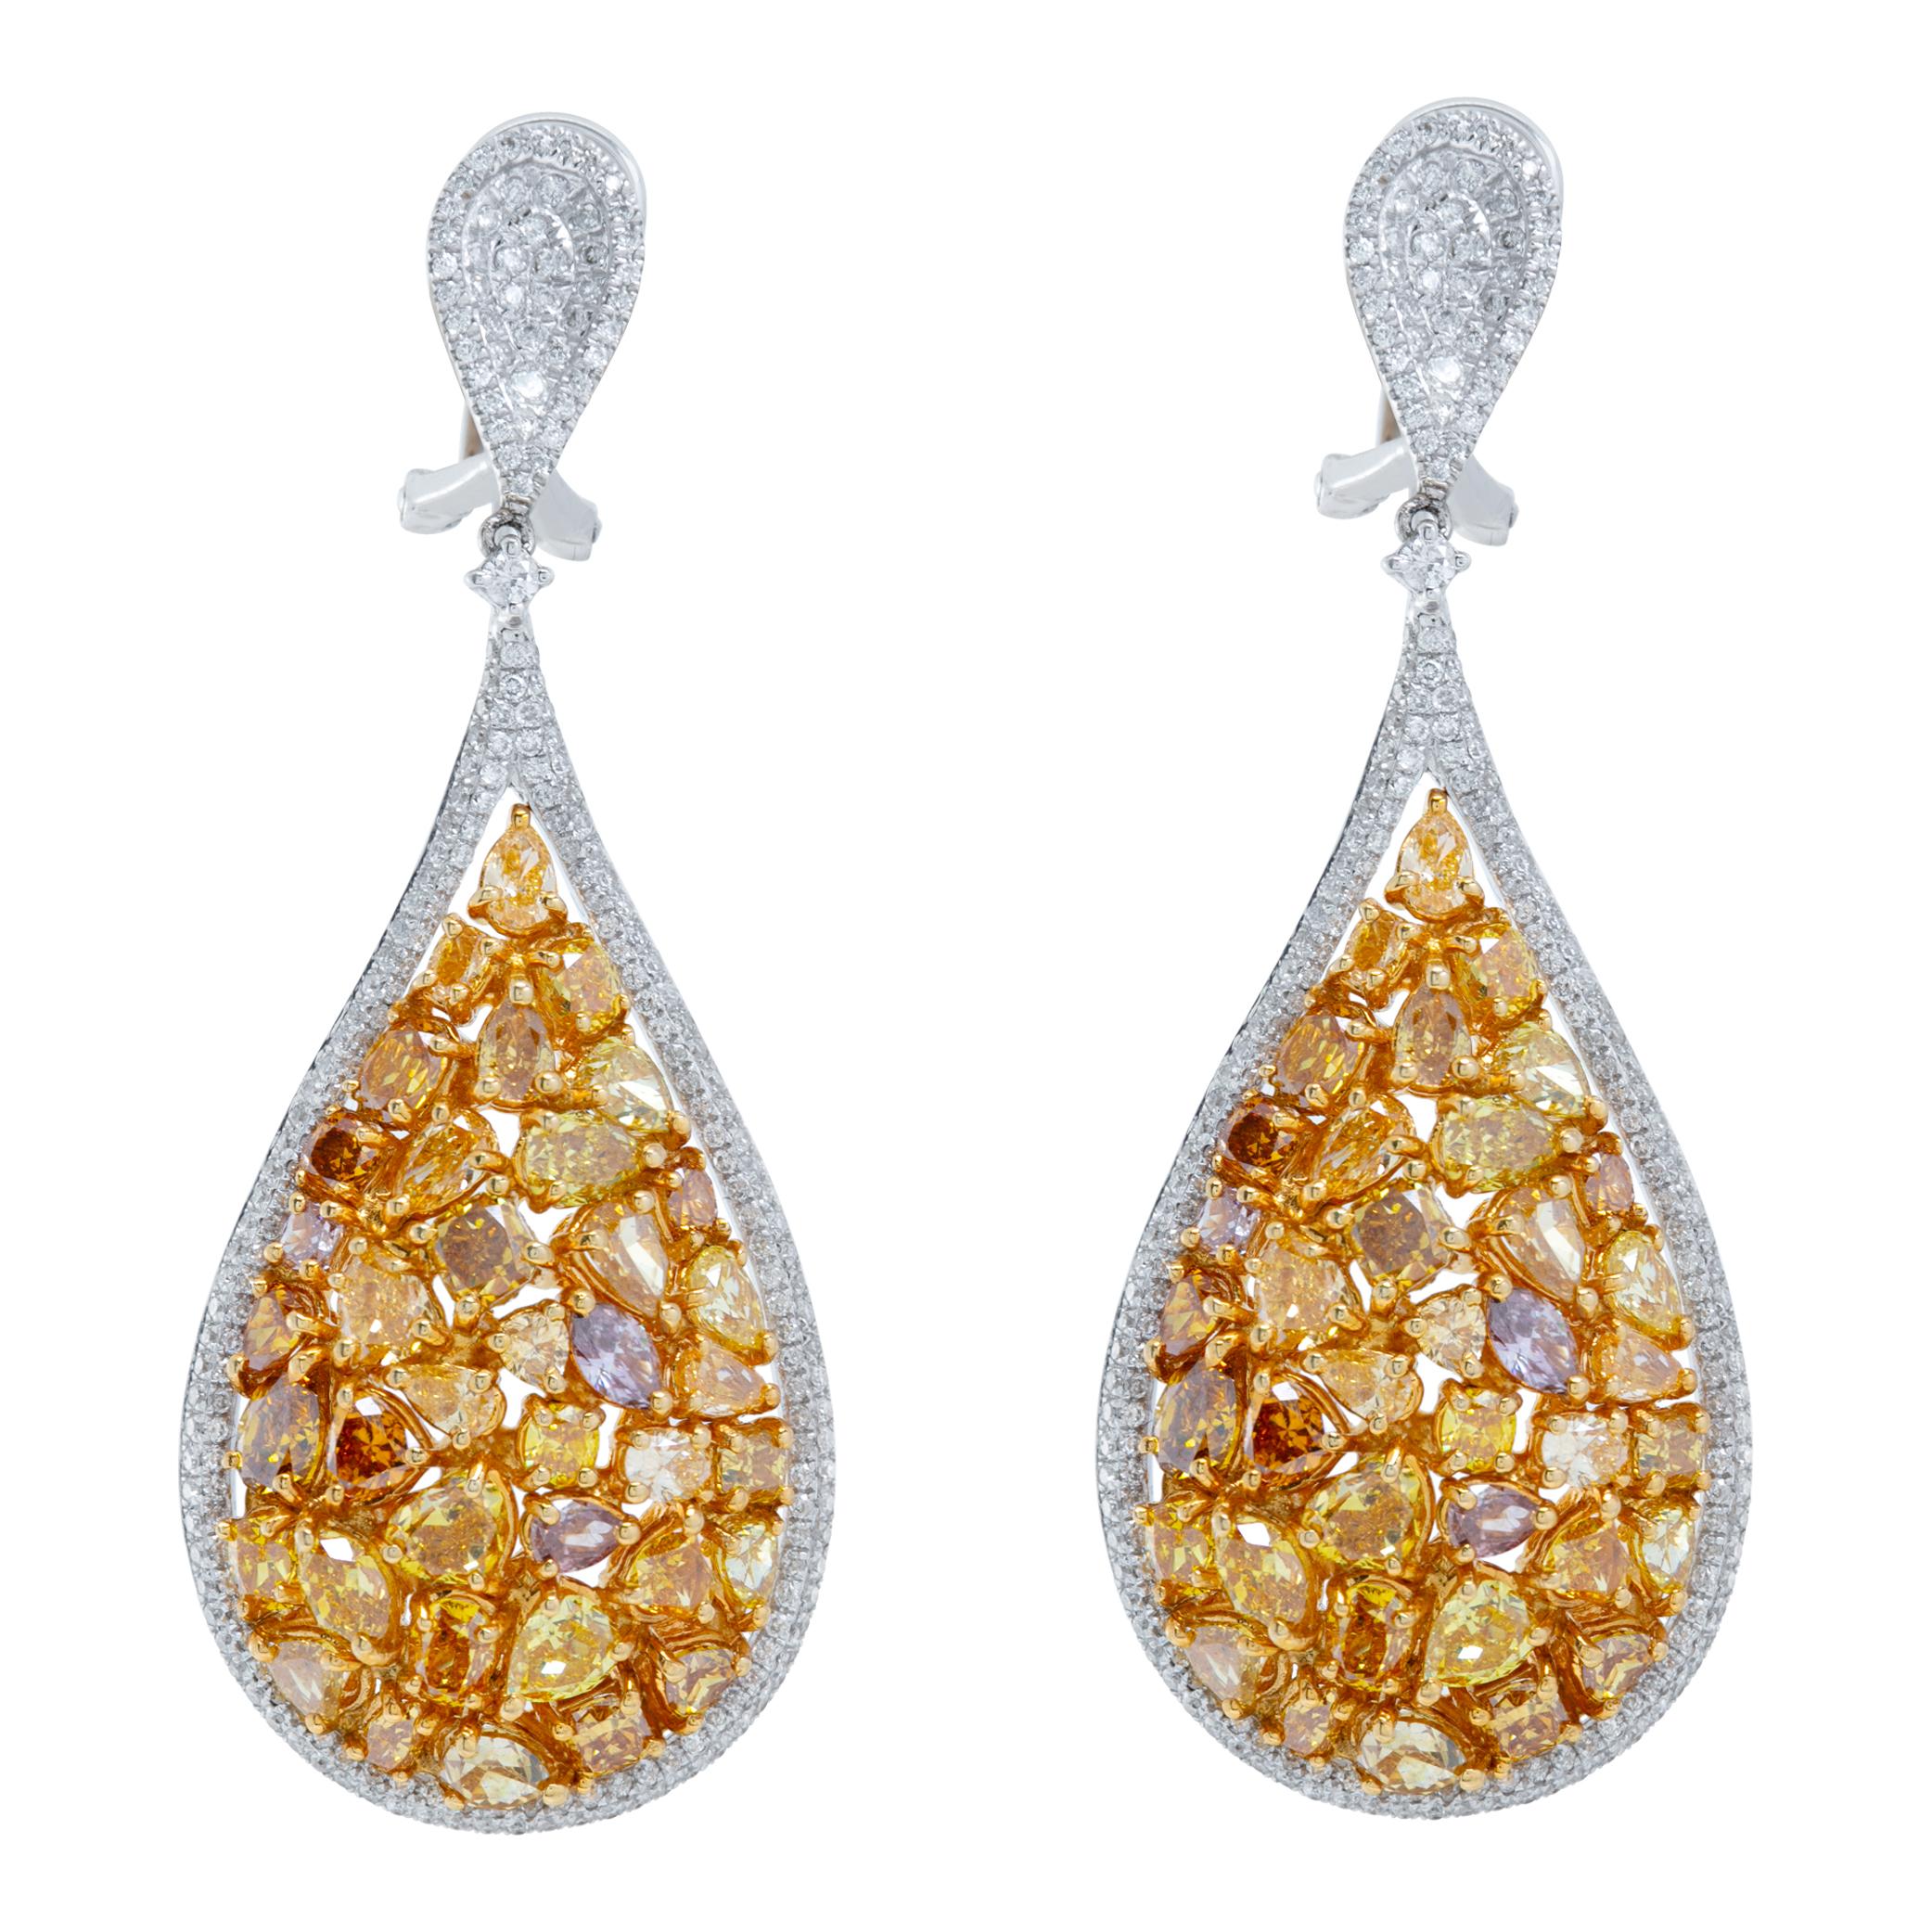 Diamond 18k white and yellow gold hanging earrings